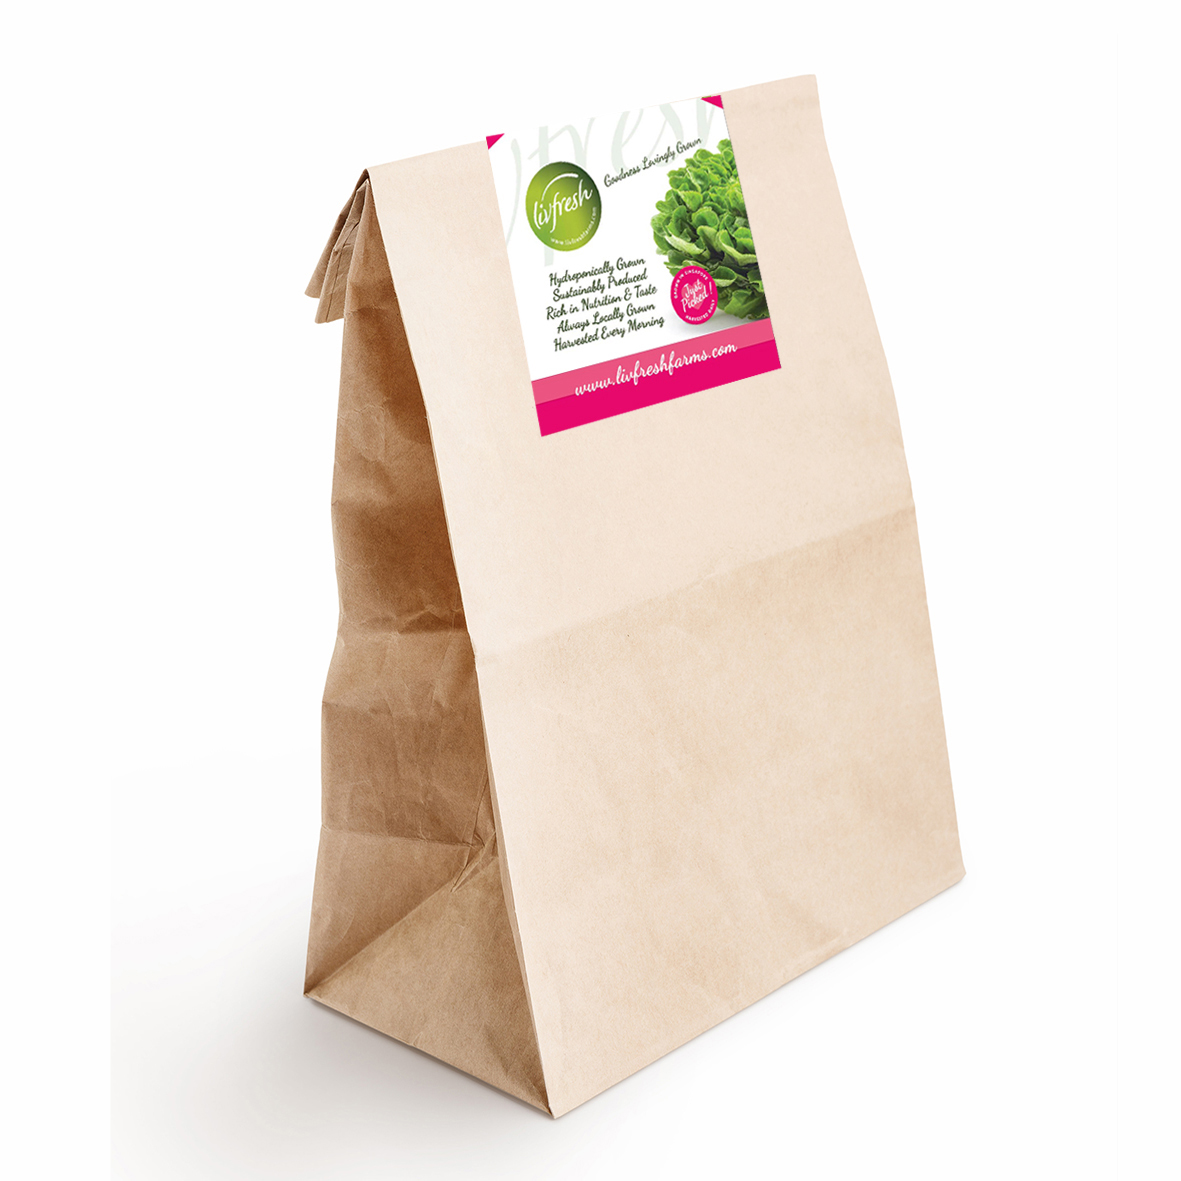 lunch-bag-on-white-small.jpg